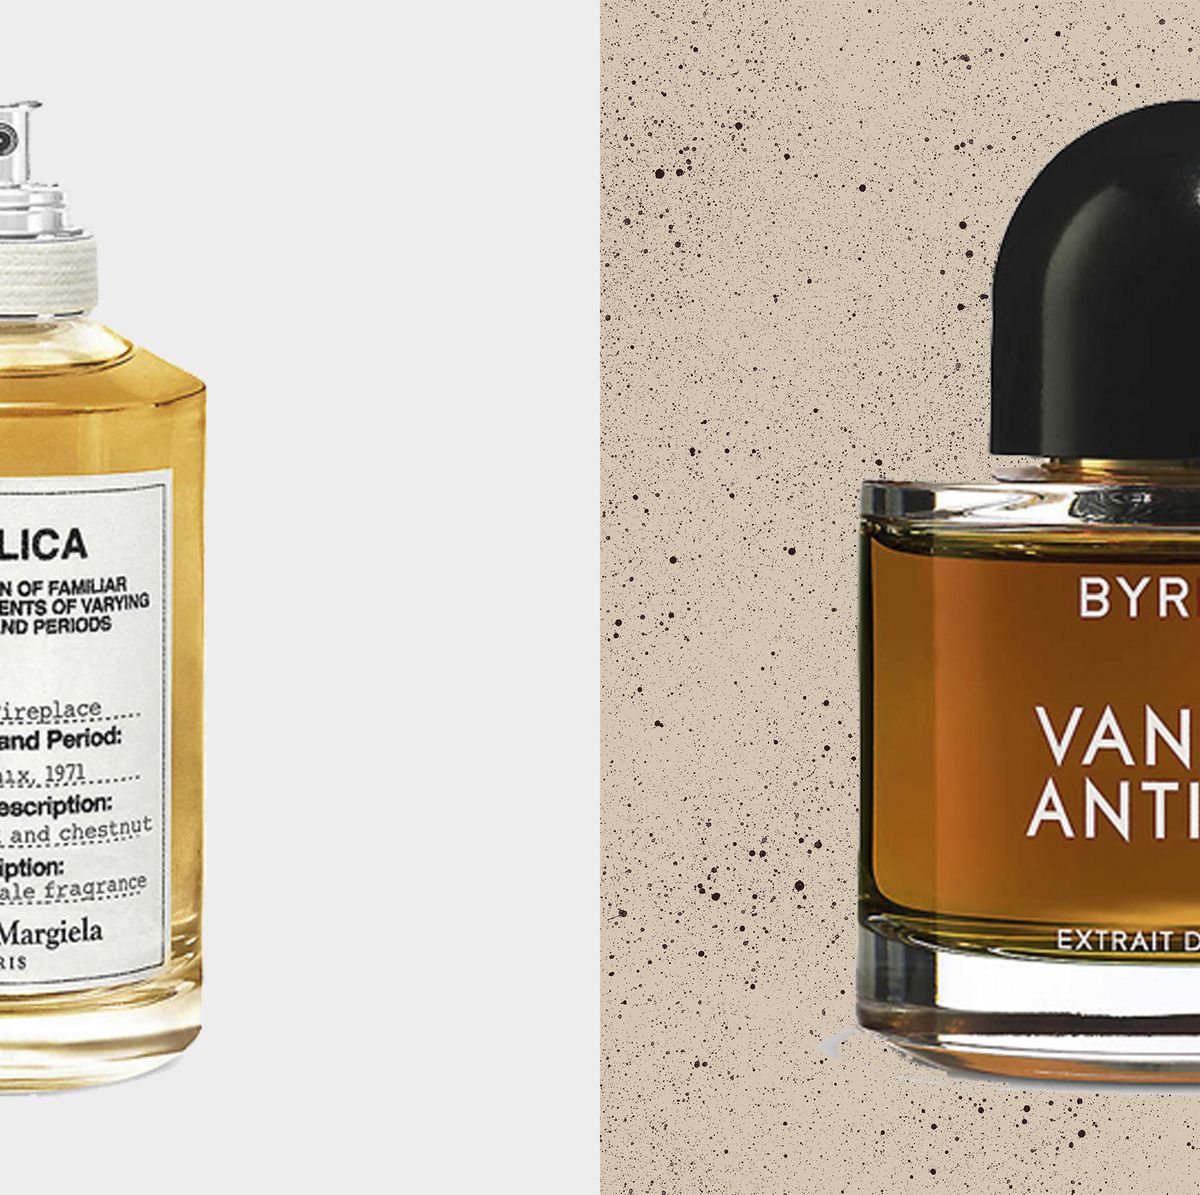 The 8 Best Vanilla Perfumes of All Time, Reviewed